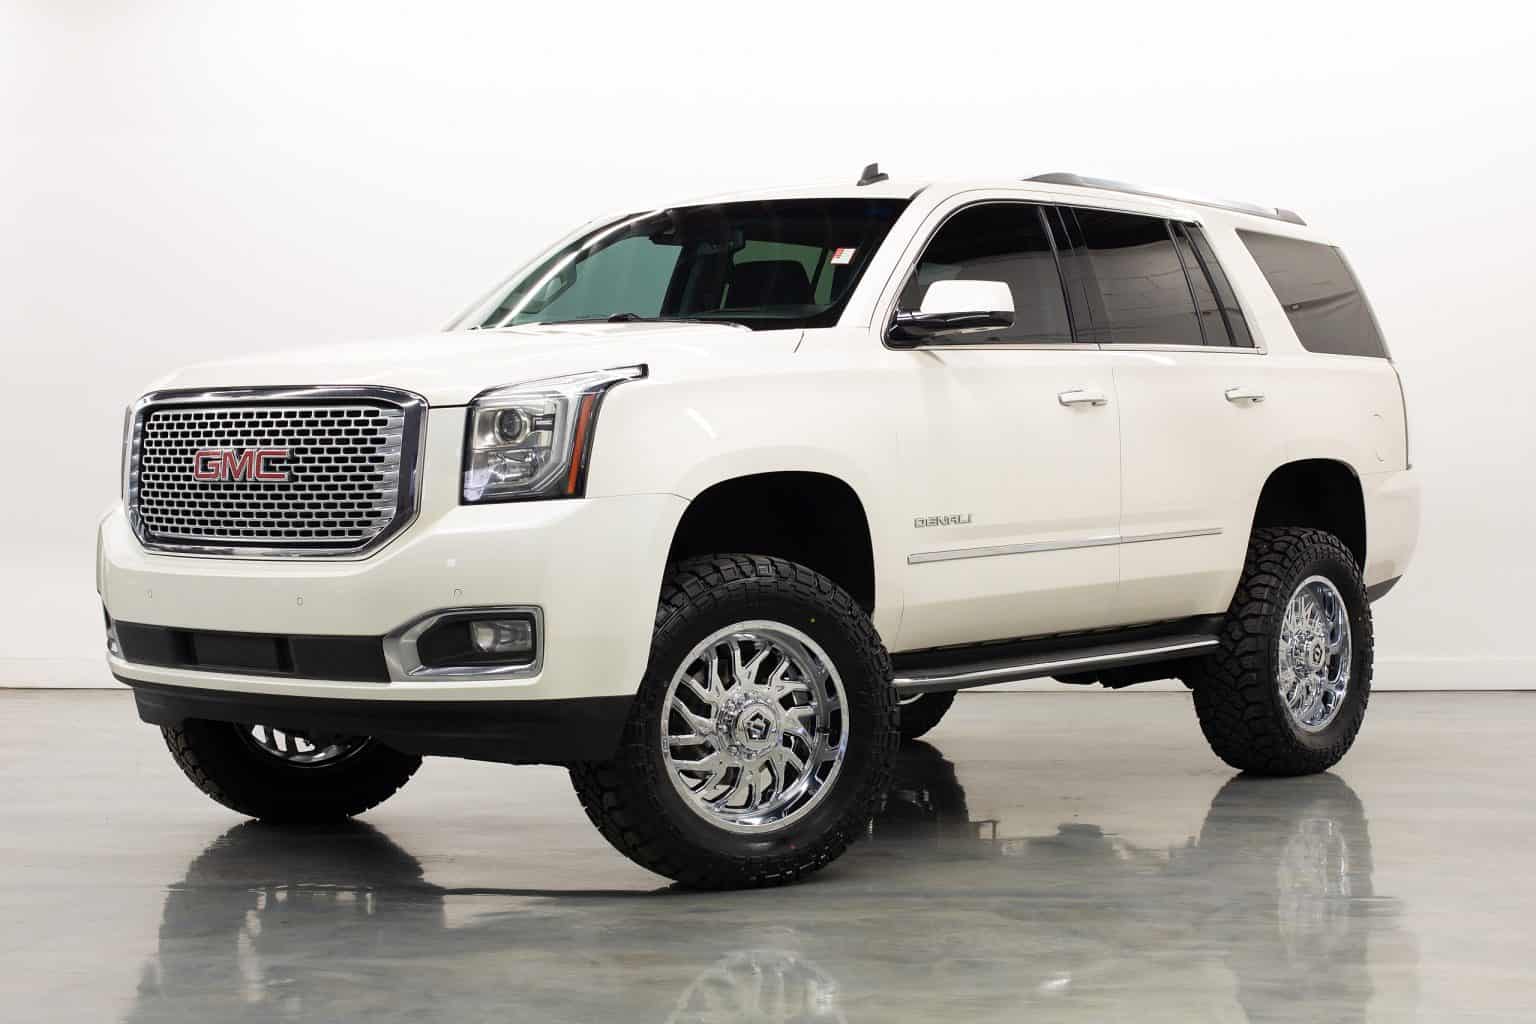 Lifted GMC Denali for Sale